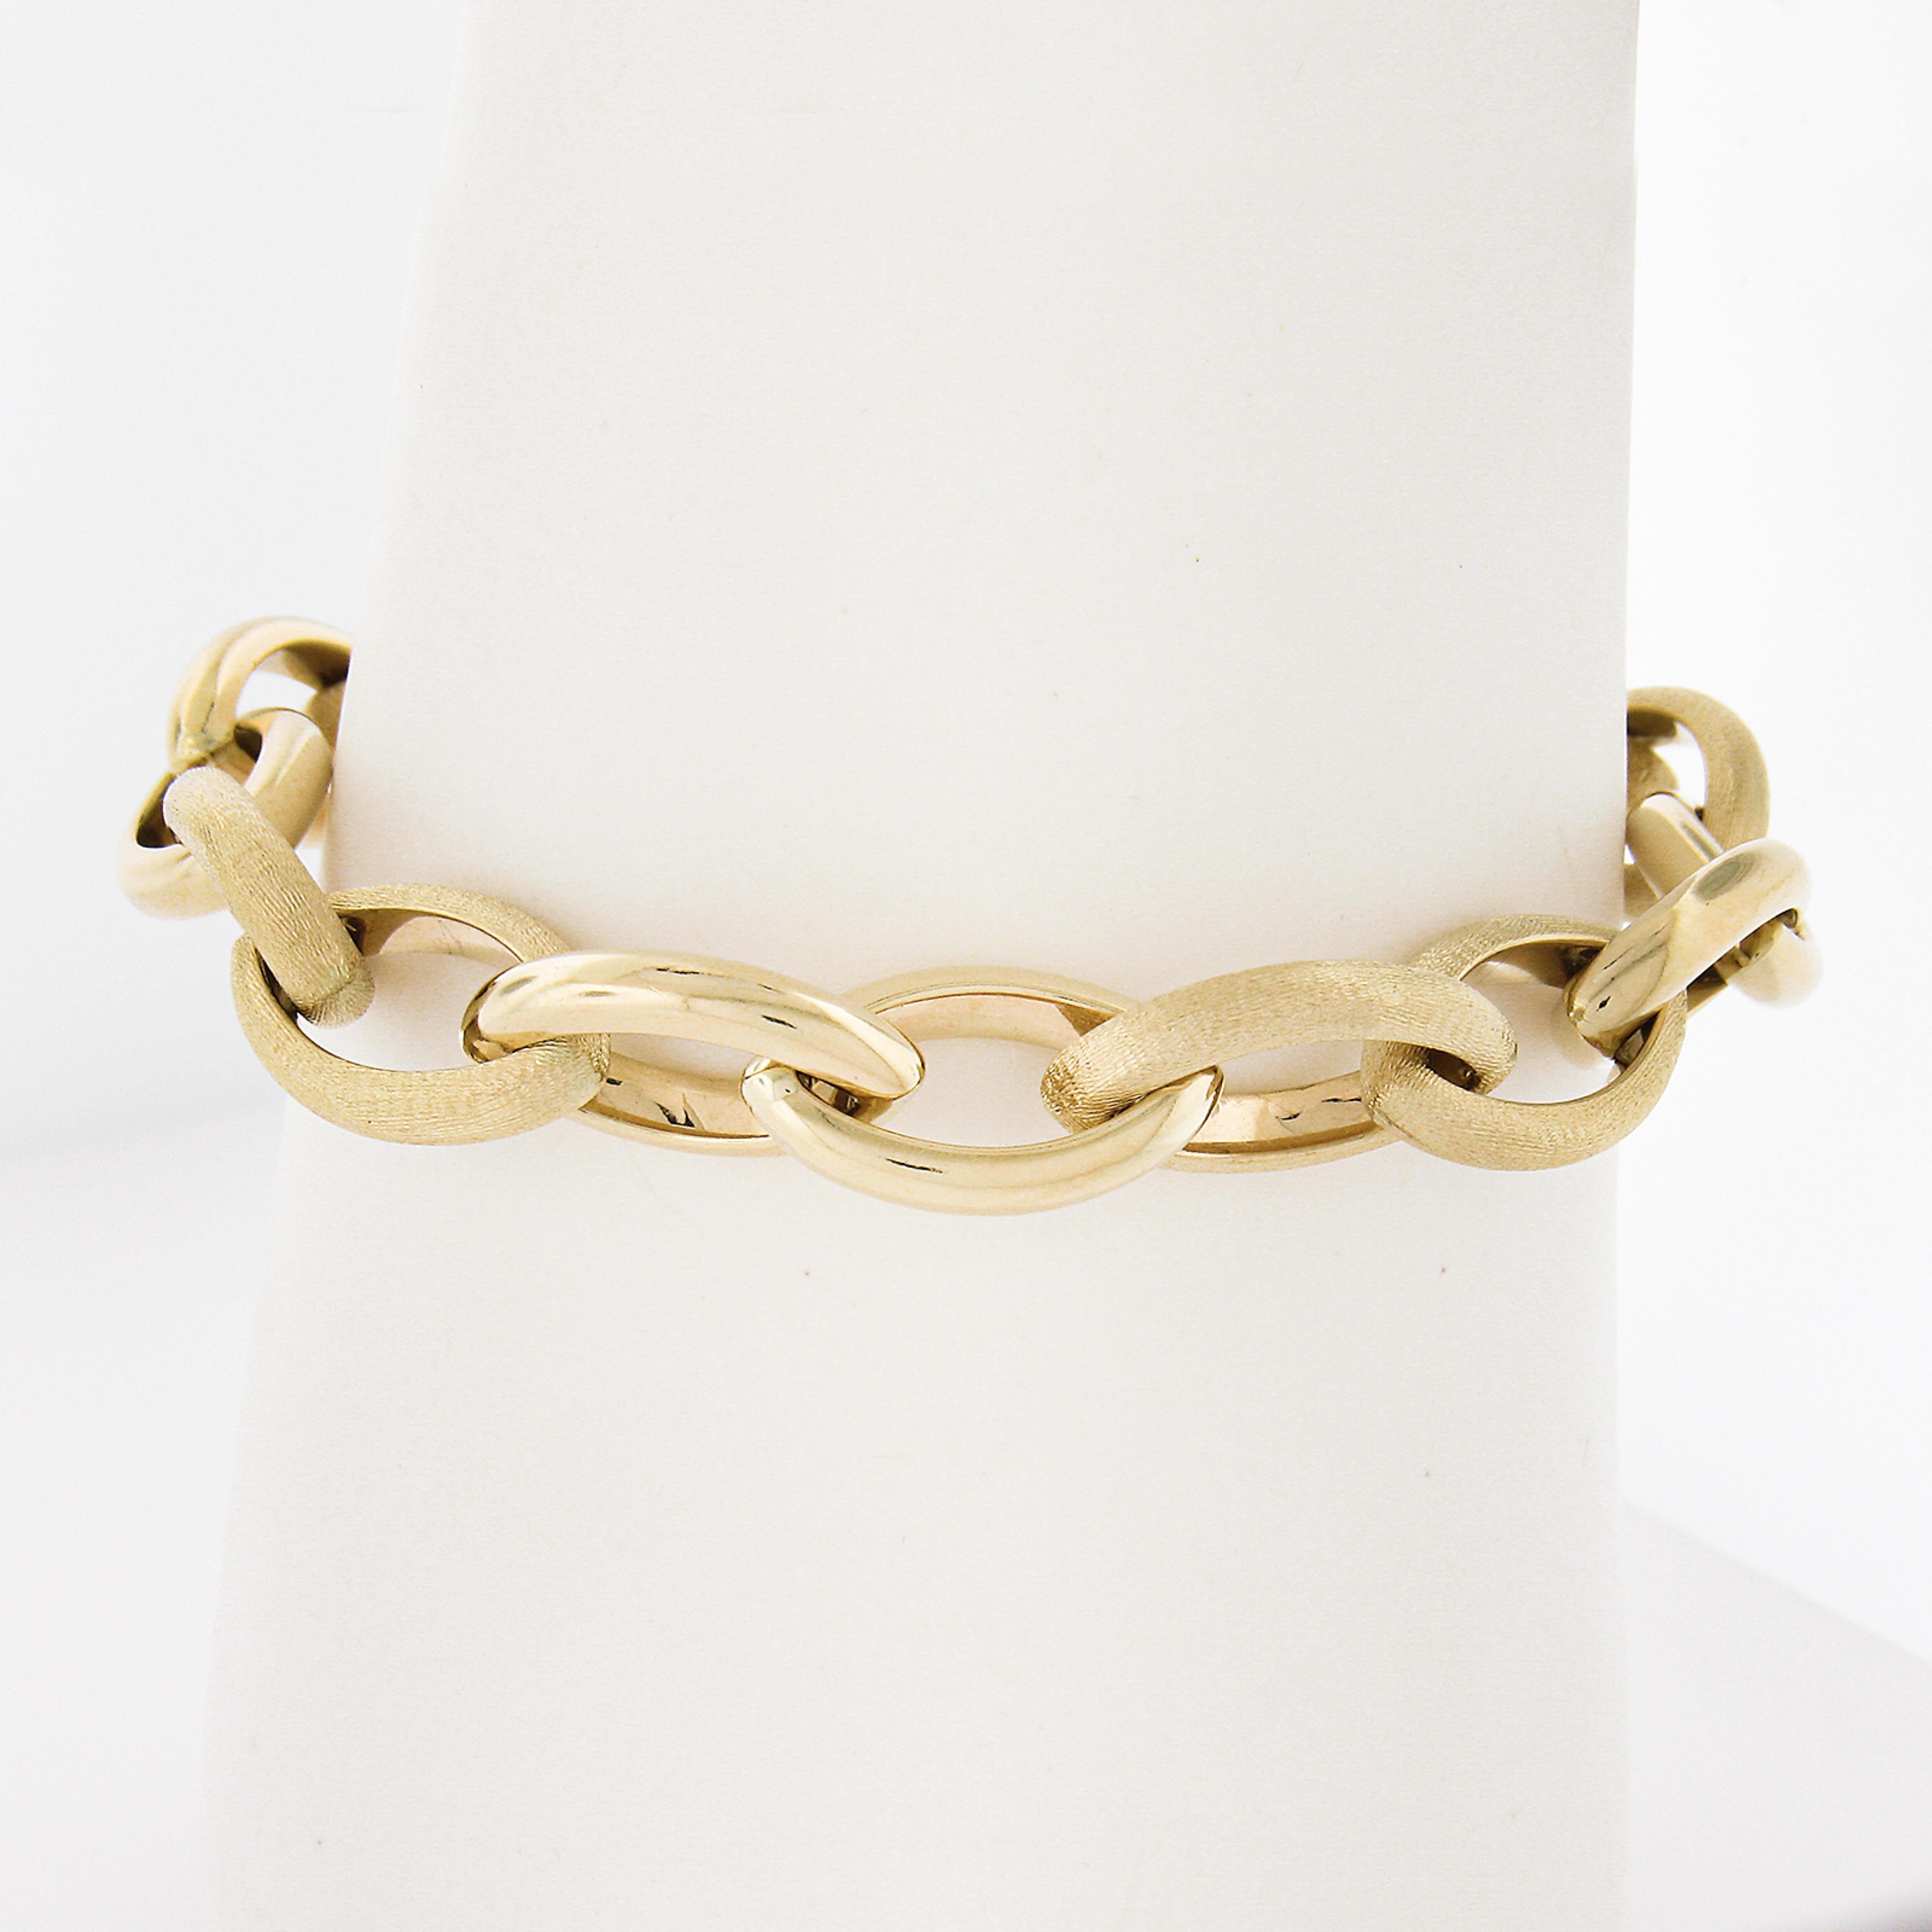 Material: Solid 14k Yellow Gold
Weight: 12.20 Grams
Chain Type: Open Marquise Links
Chain Length: Measures 7 Inches Next to a Ruler. Will Comfortably fit a 6.5 inch wrist (fitted on a wrist)
Clasp: Large Lobster Claw Clasp
Link Width: 10.3mm